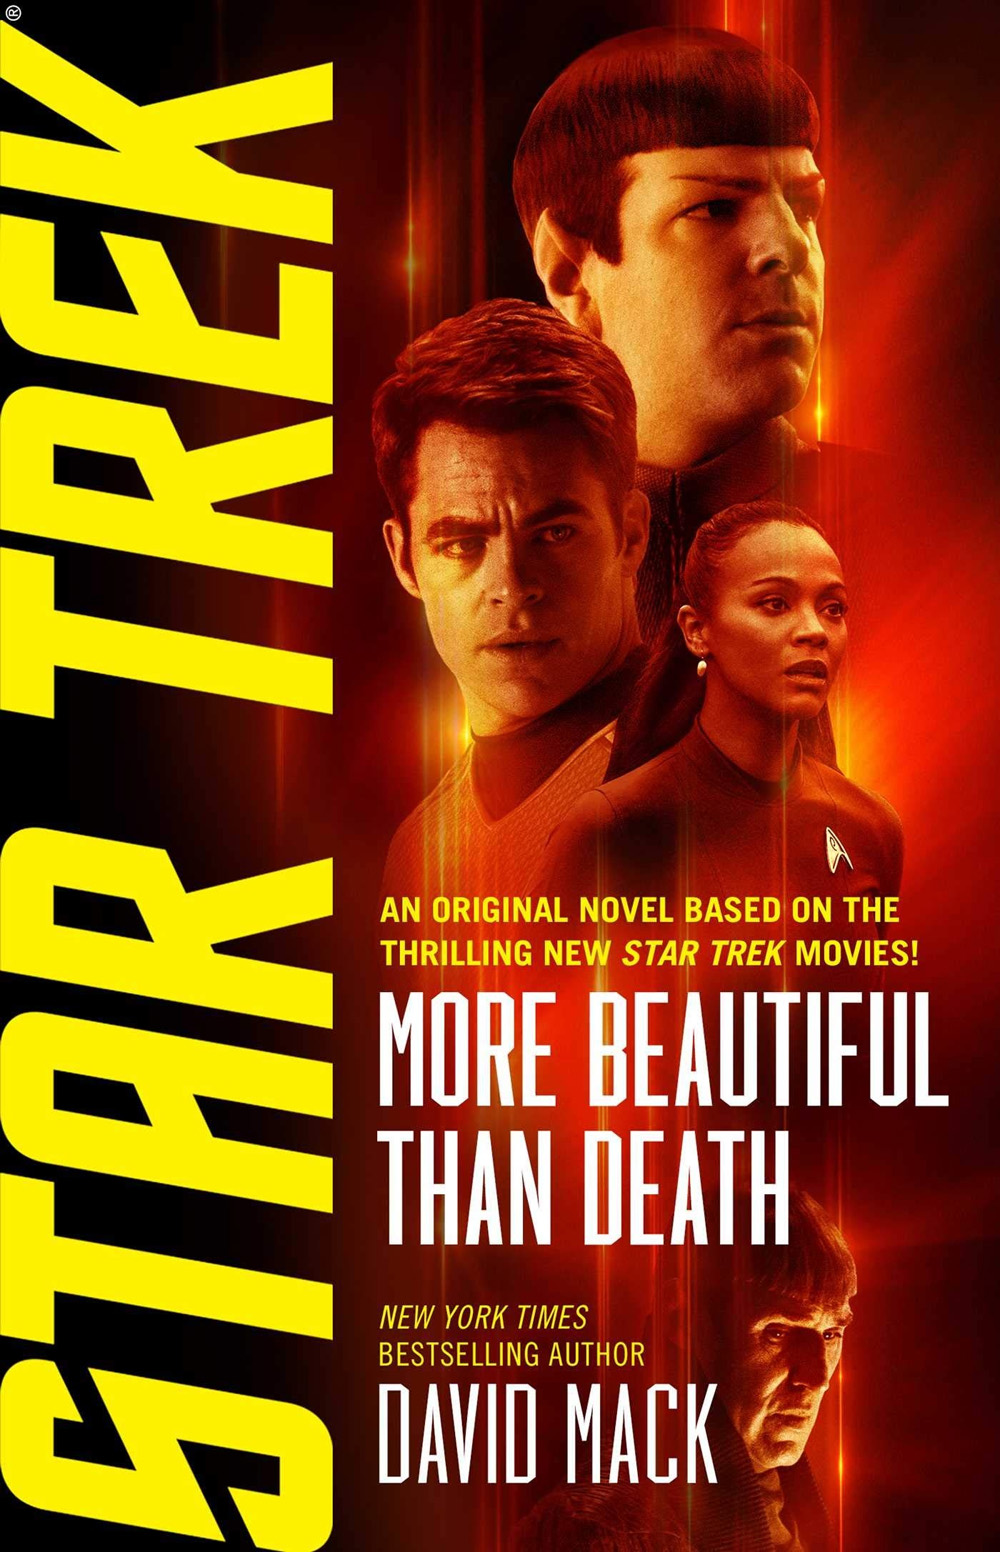 "More Beautiful Than Death" Stardate 2258 Released: Sep 2020